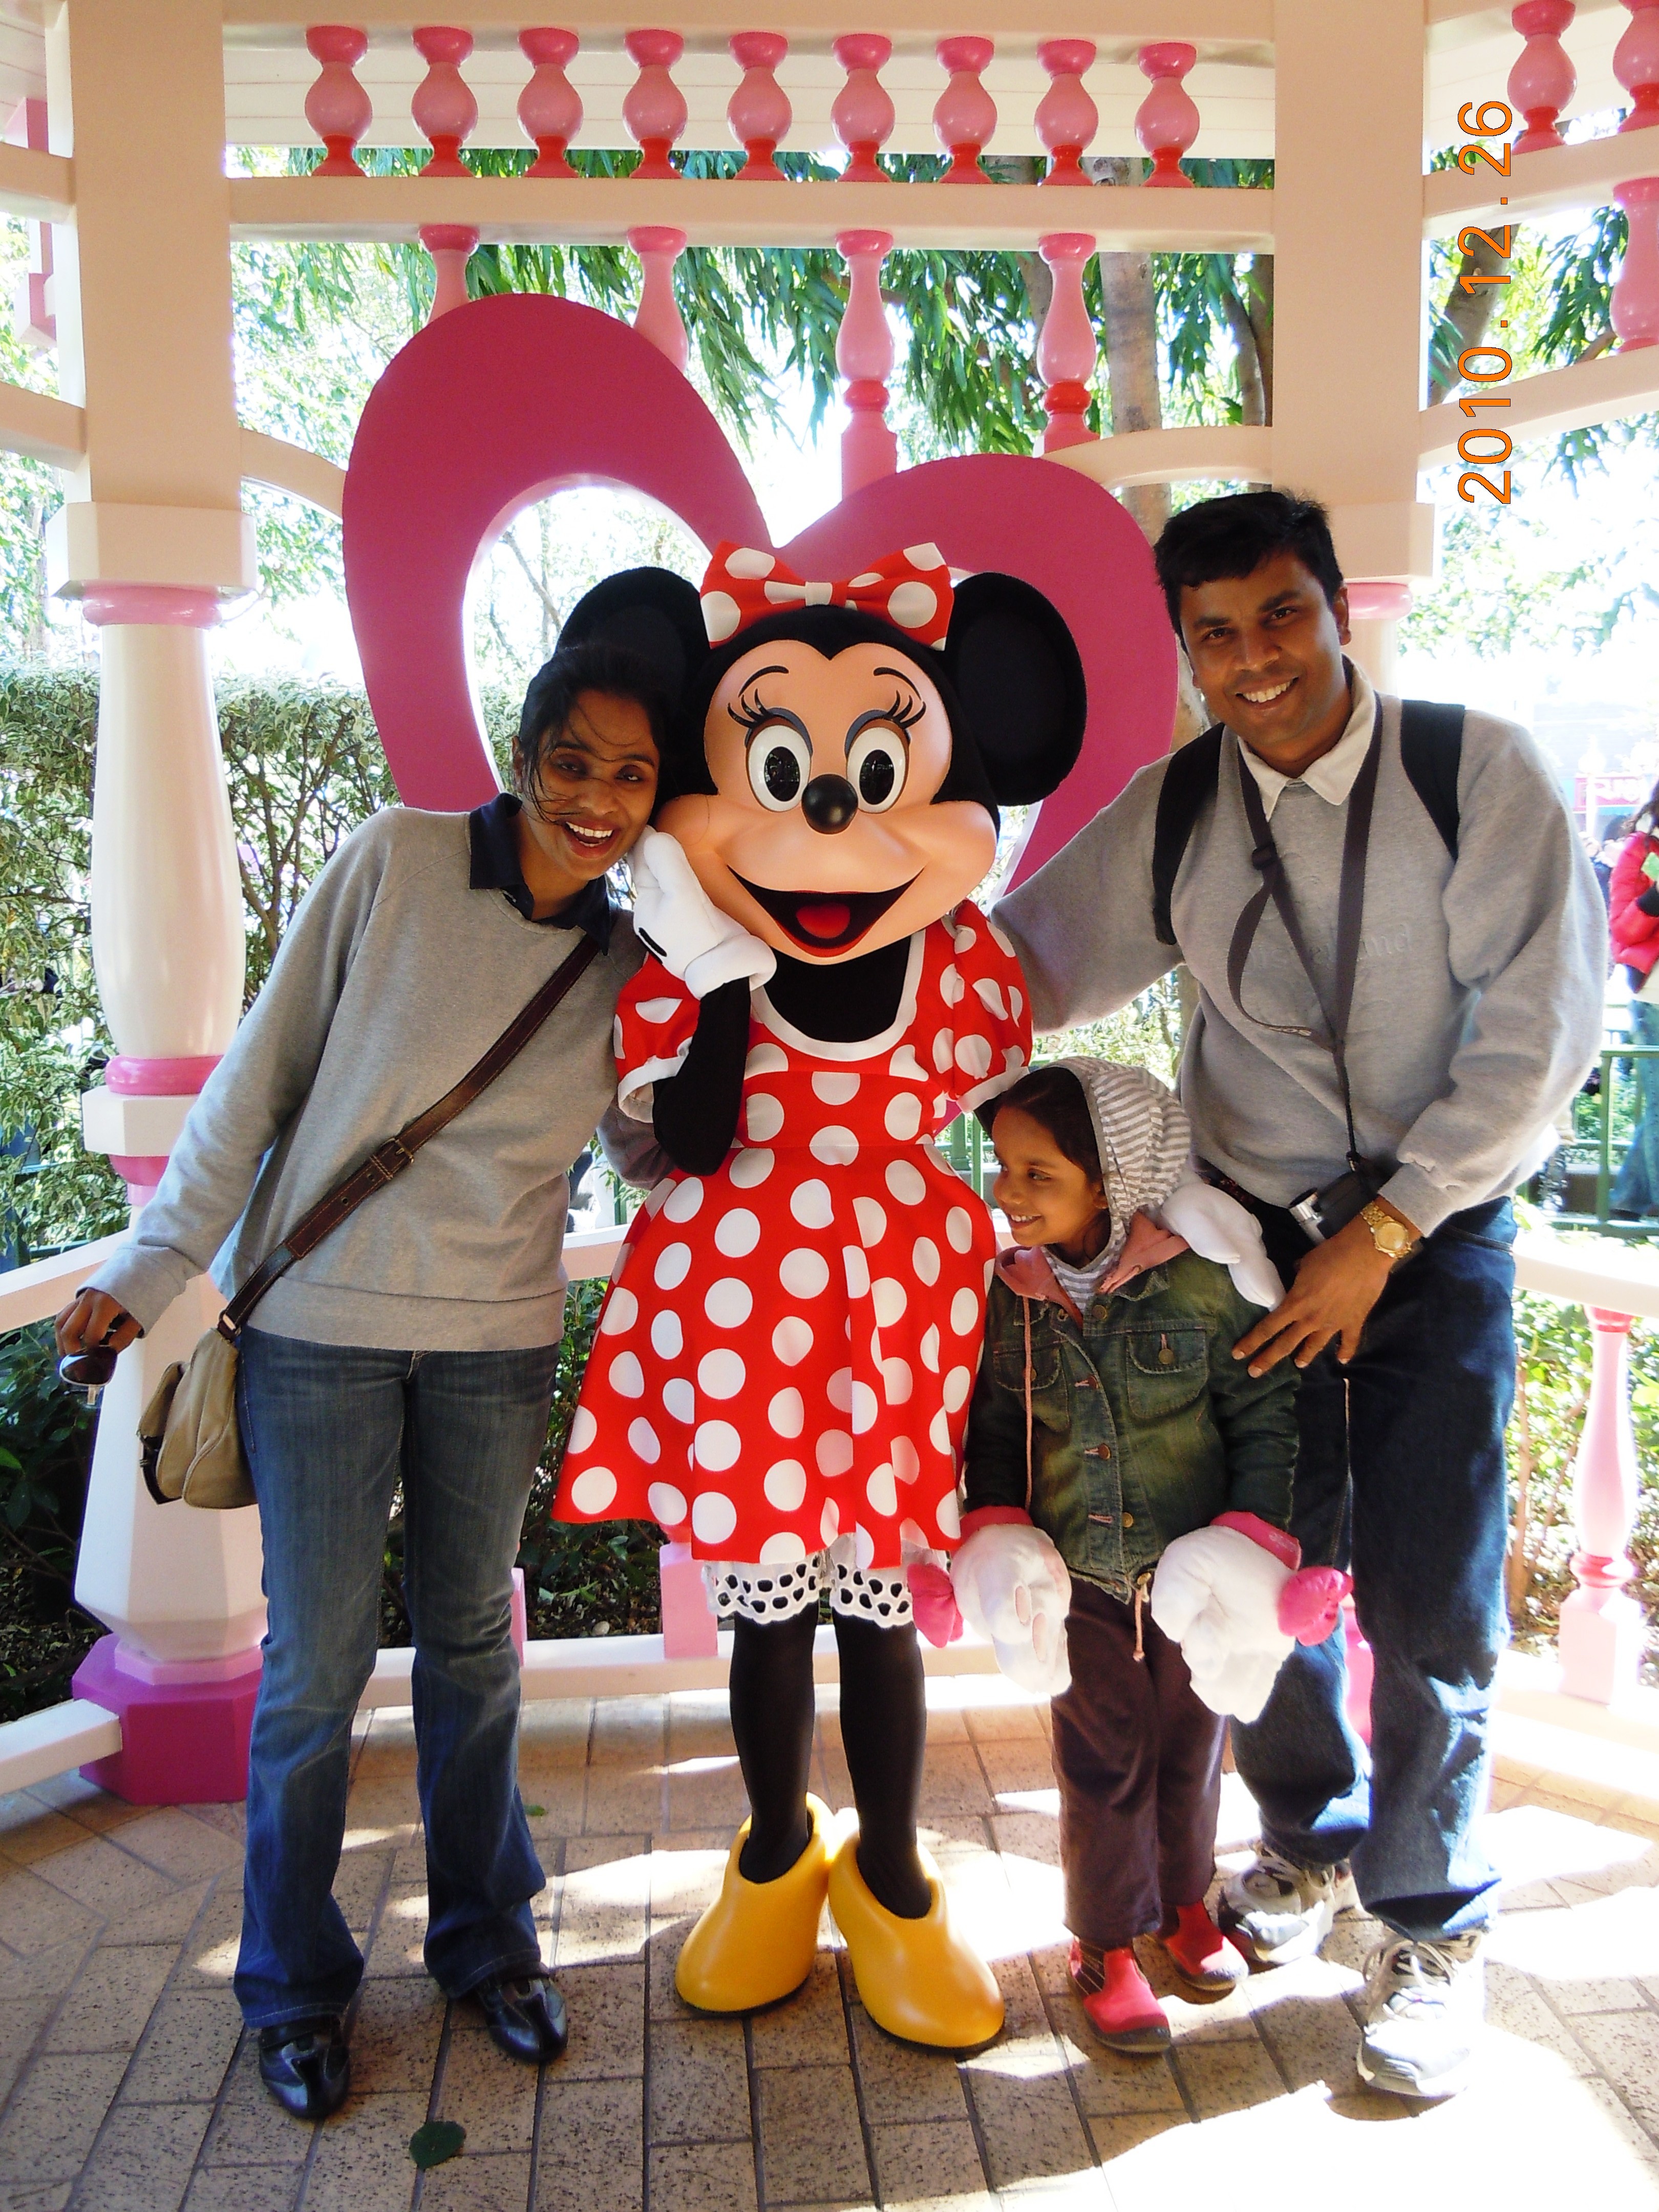 With Minnie Mouse